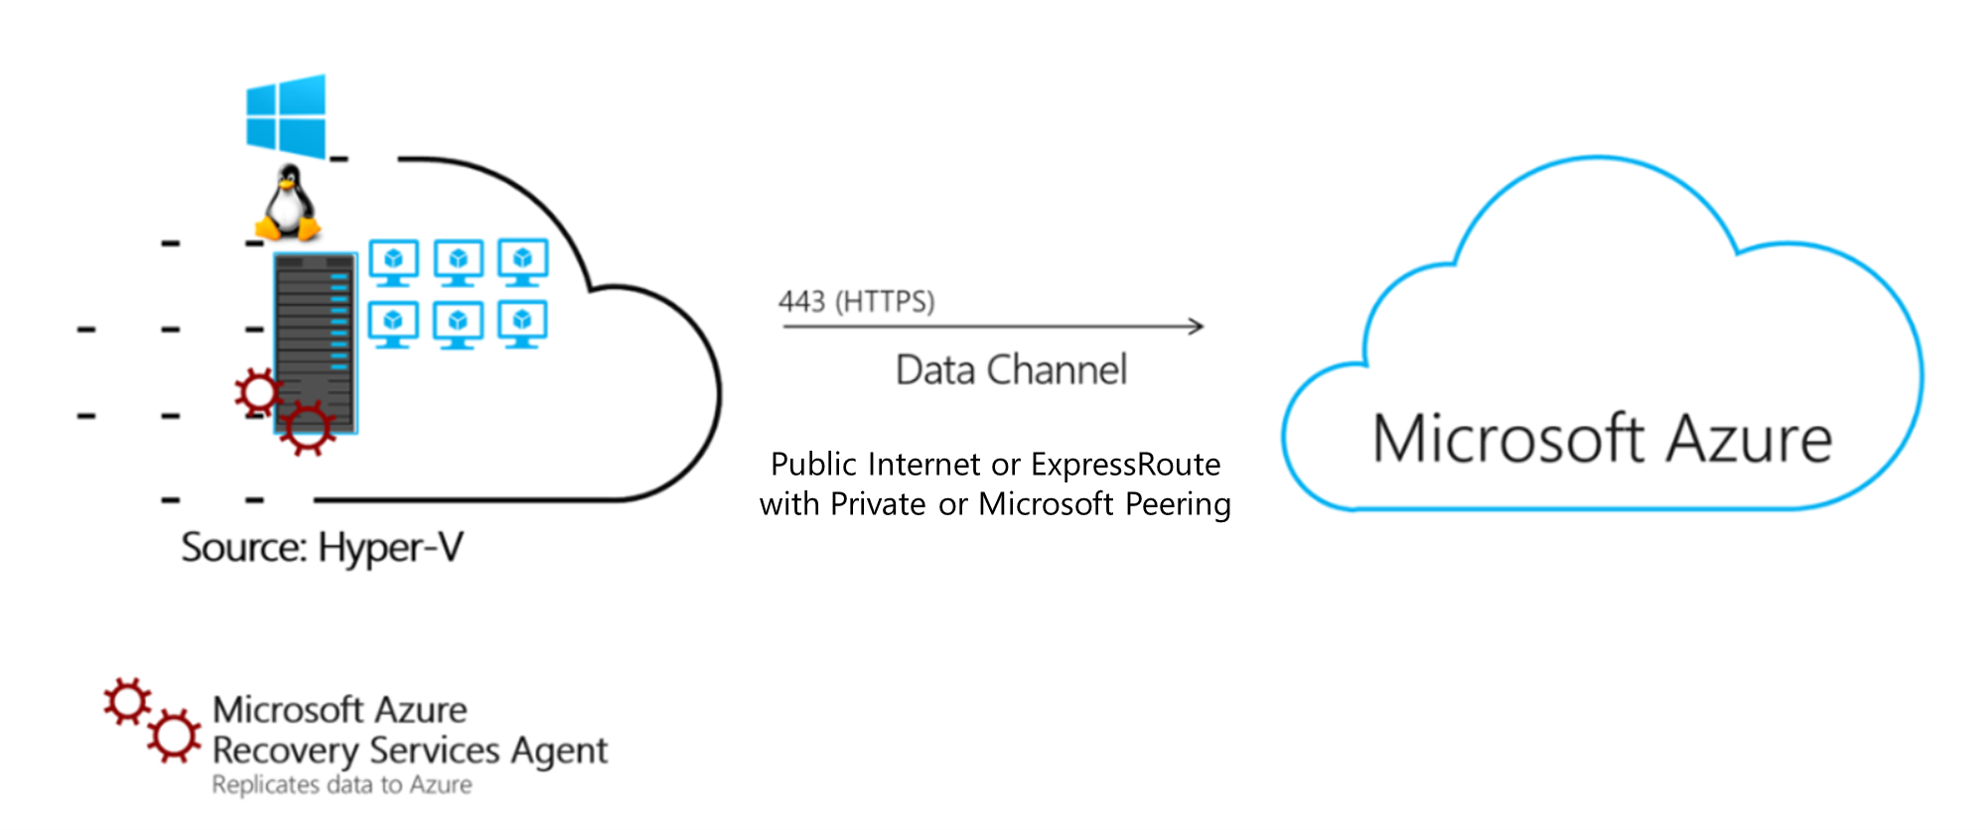 Diagram shows a Source Hyper-V network with an H T T P S data channel to Azure, with details explained in a table.